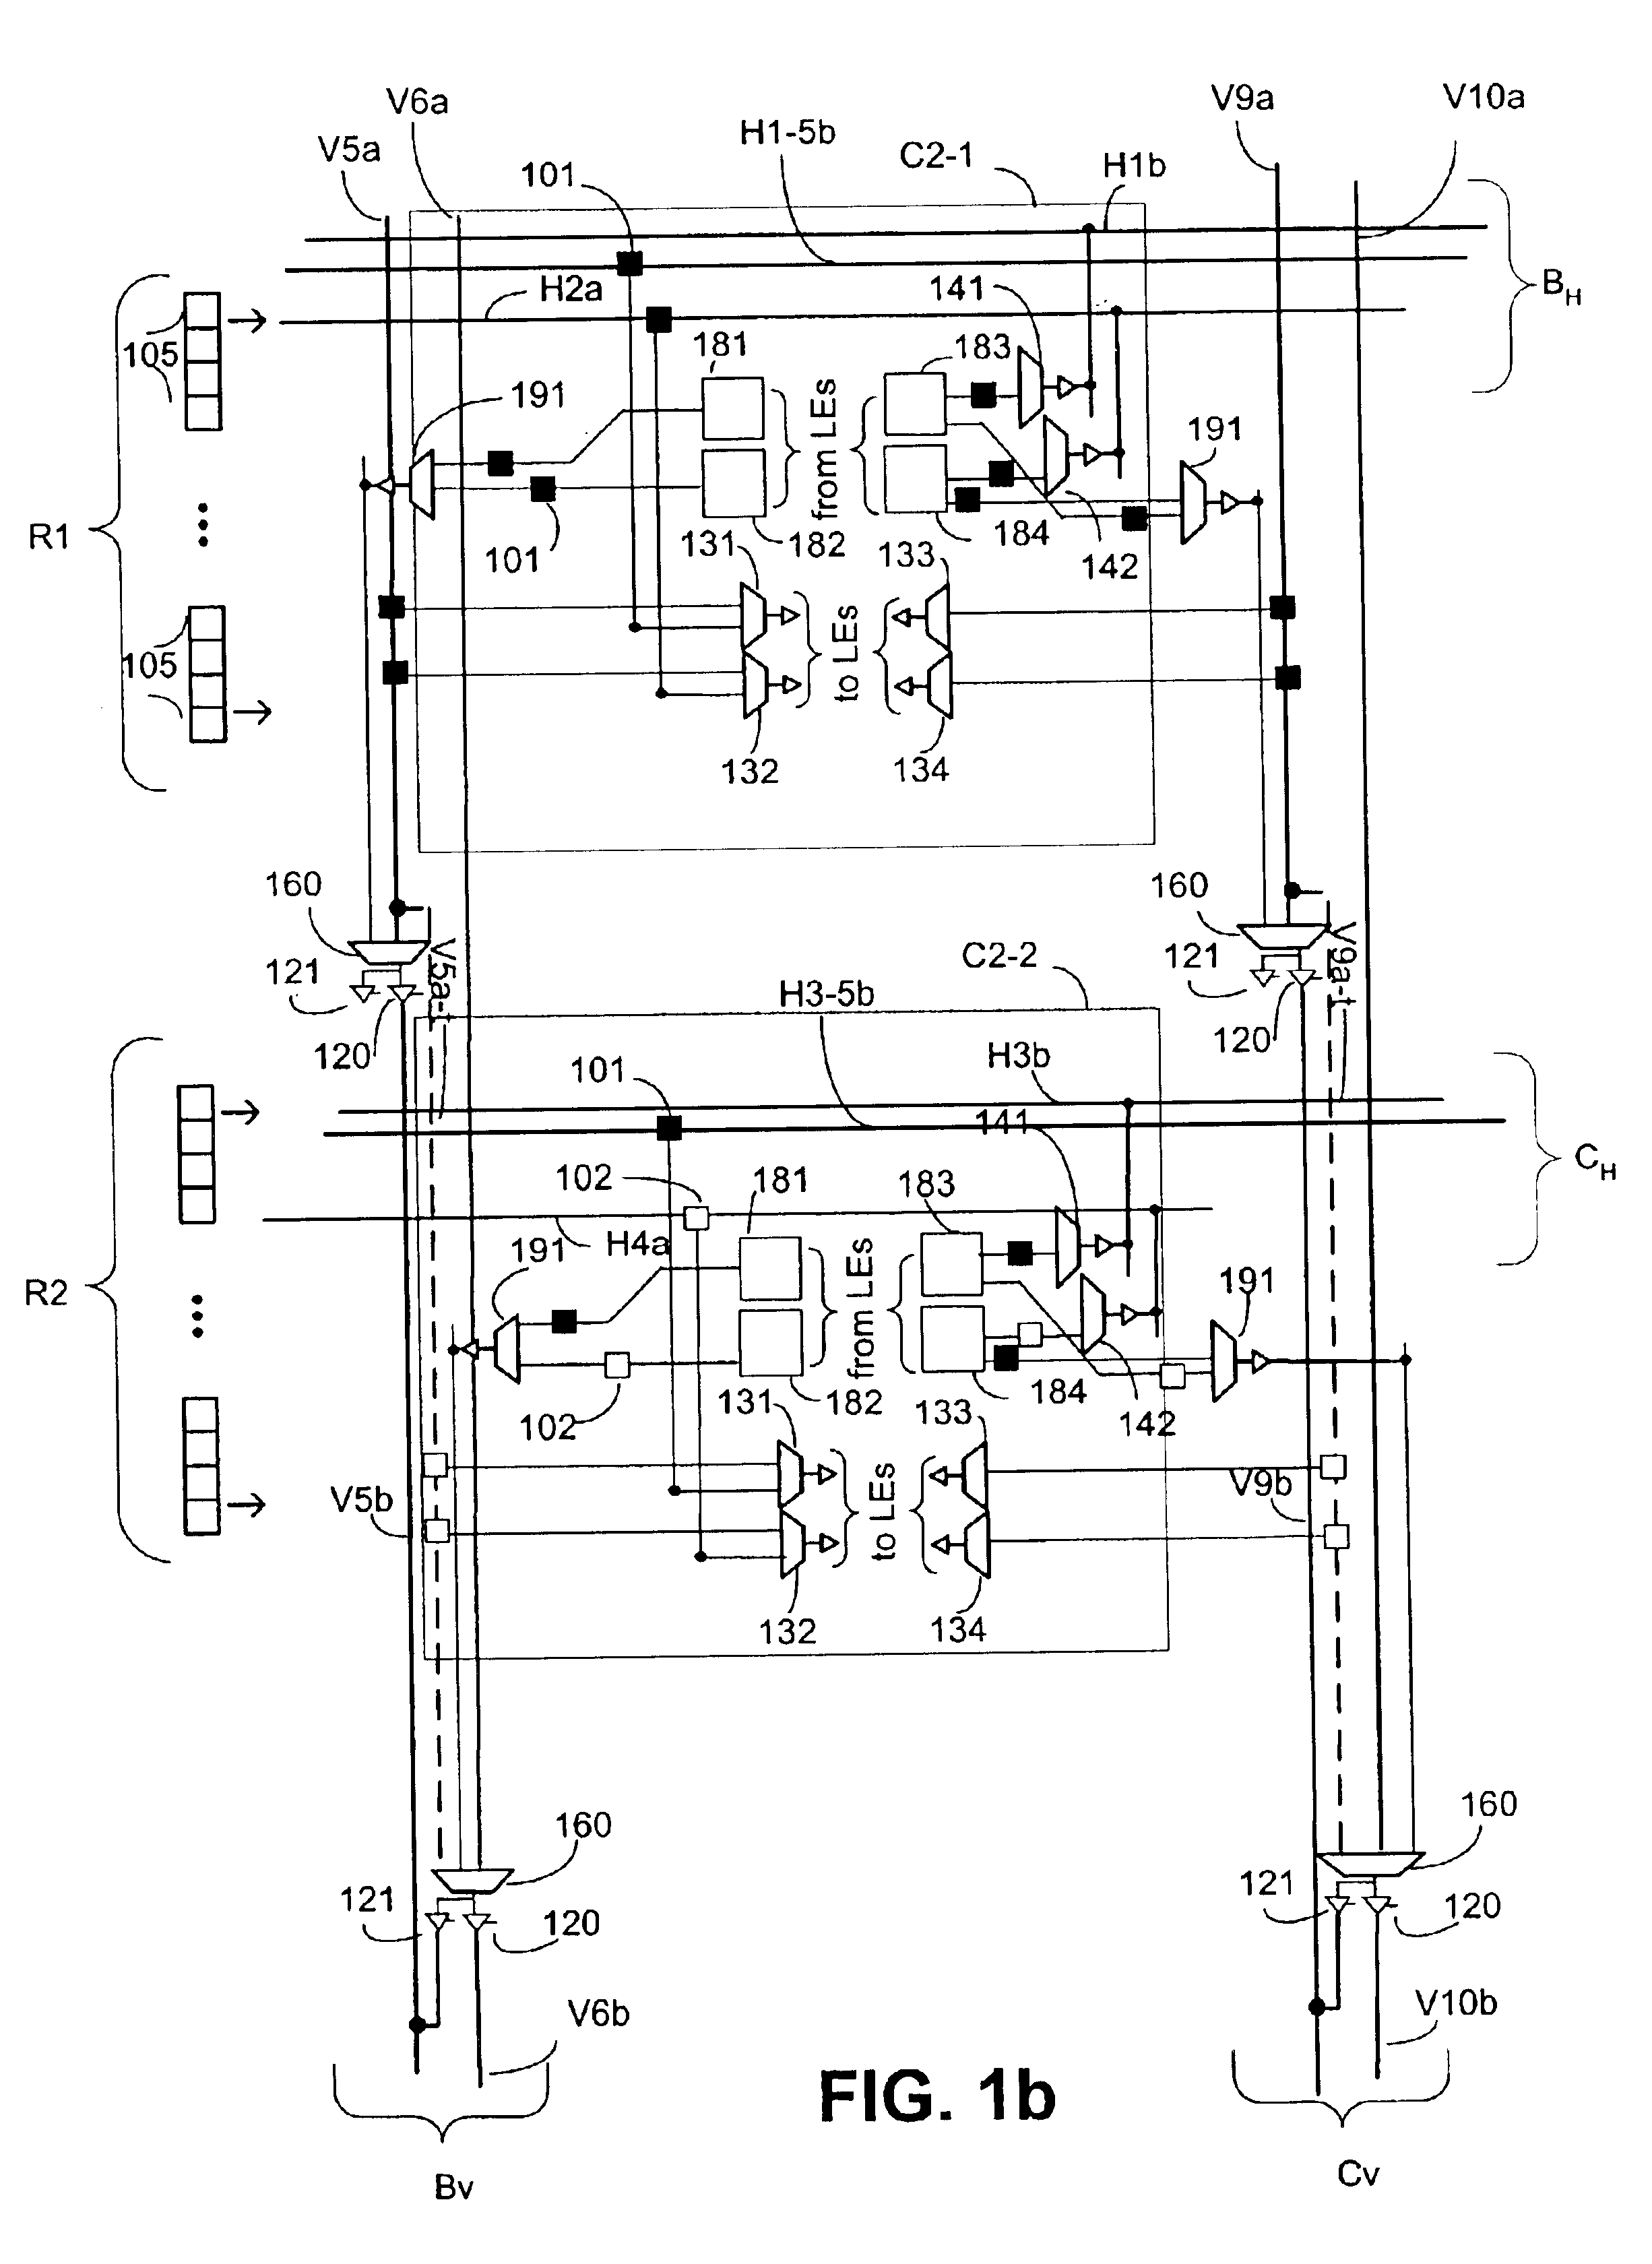 Programmable logic device with redundant circuitry